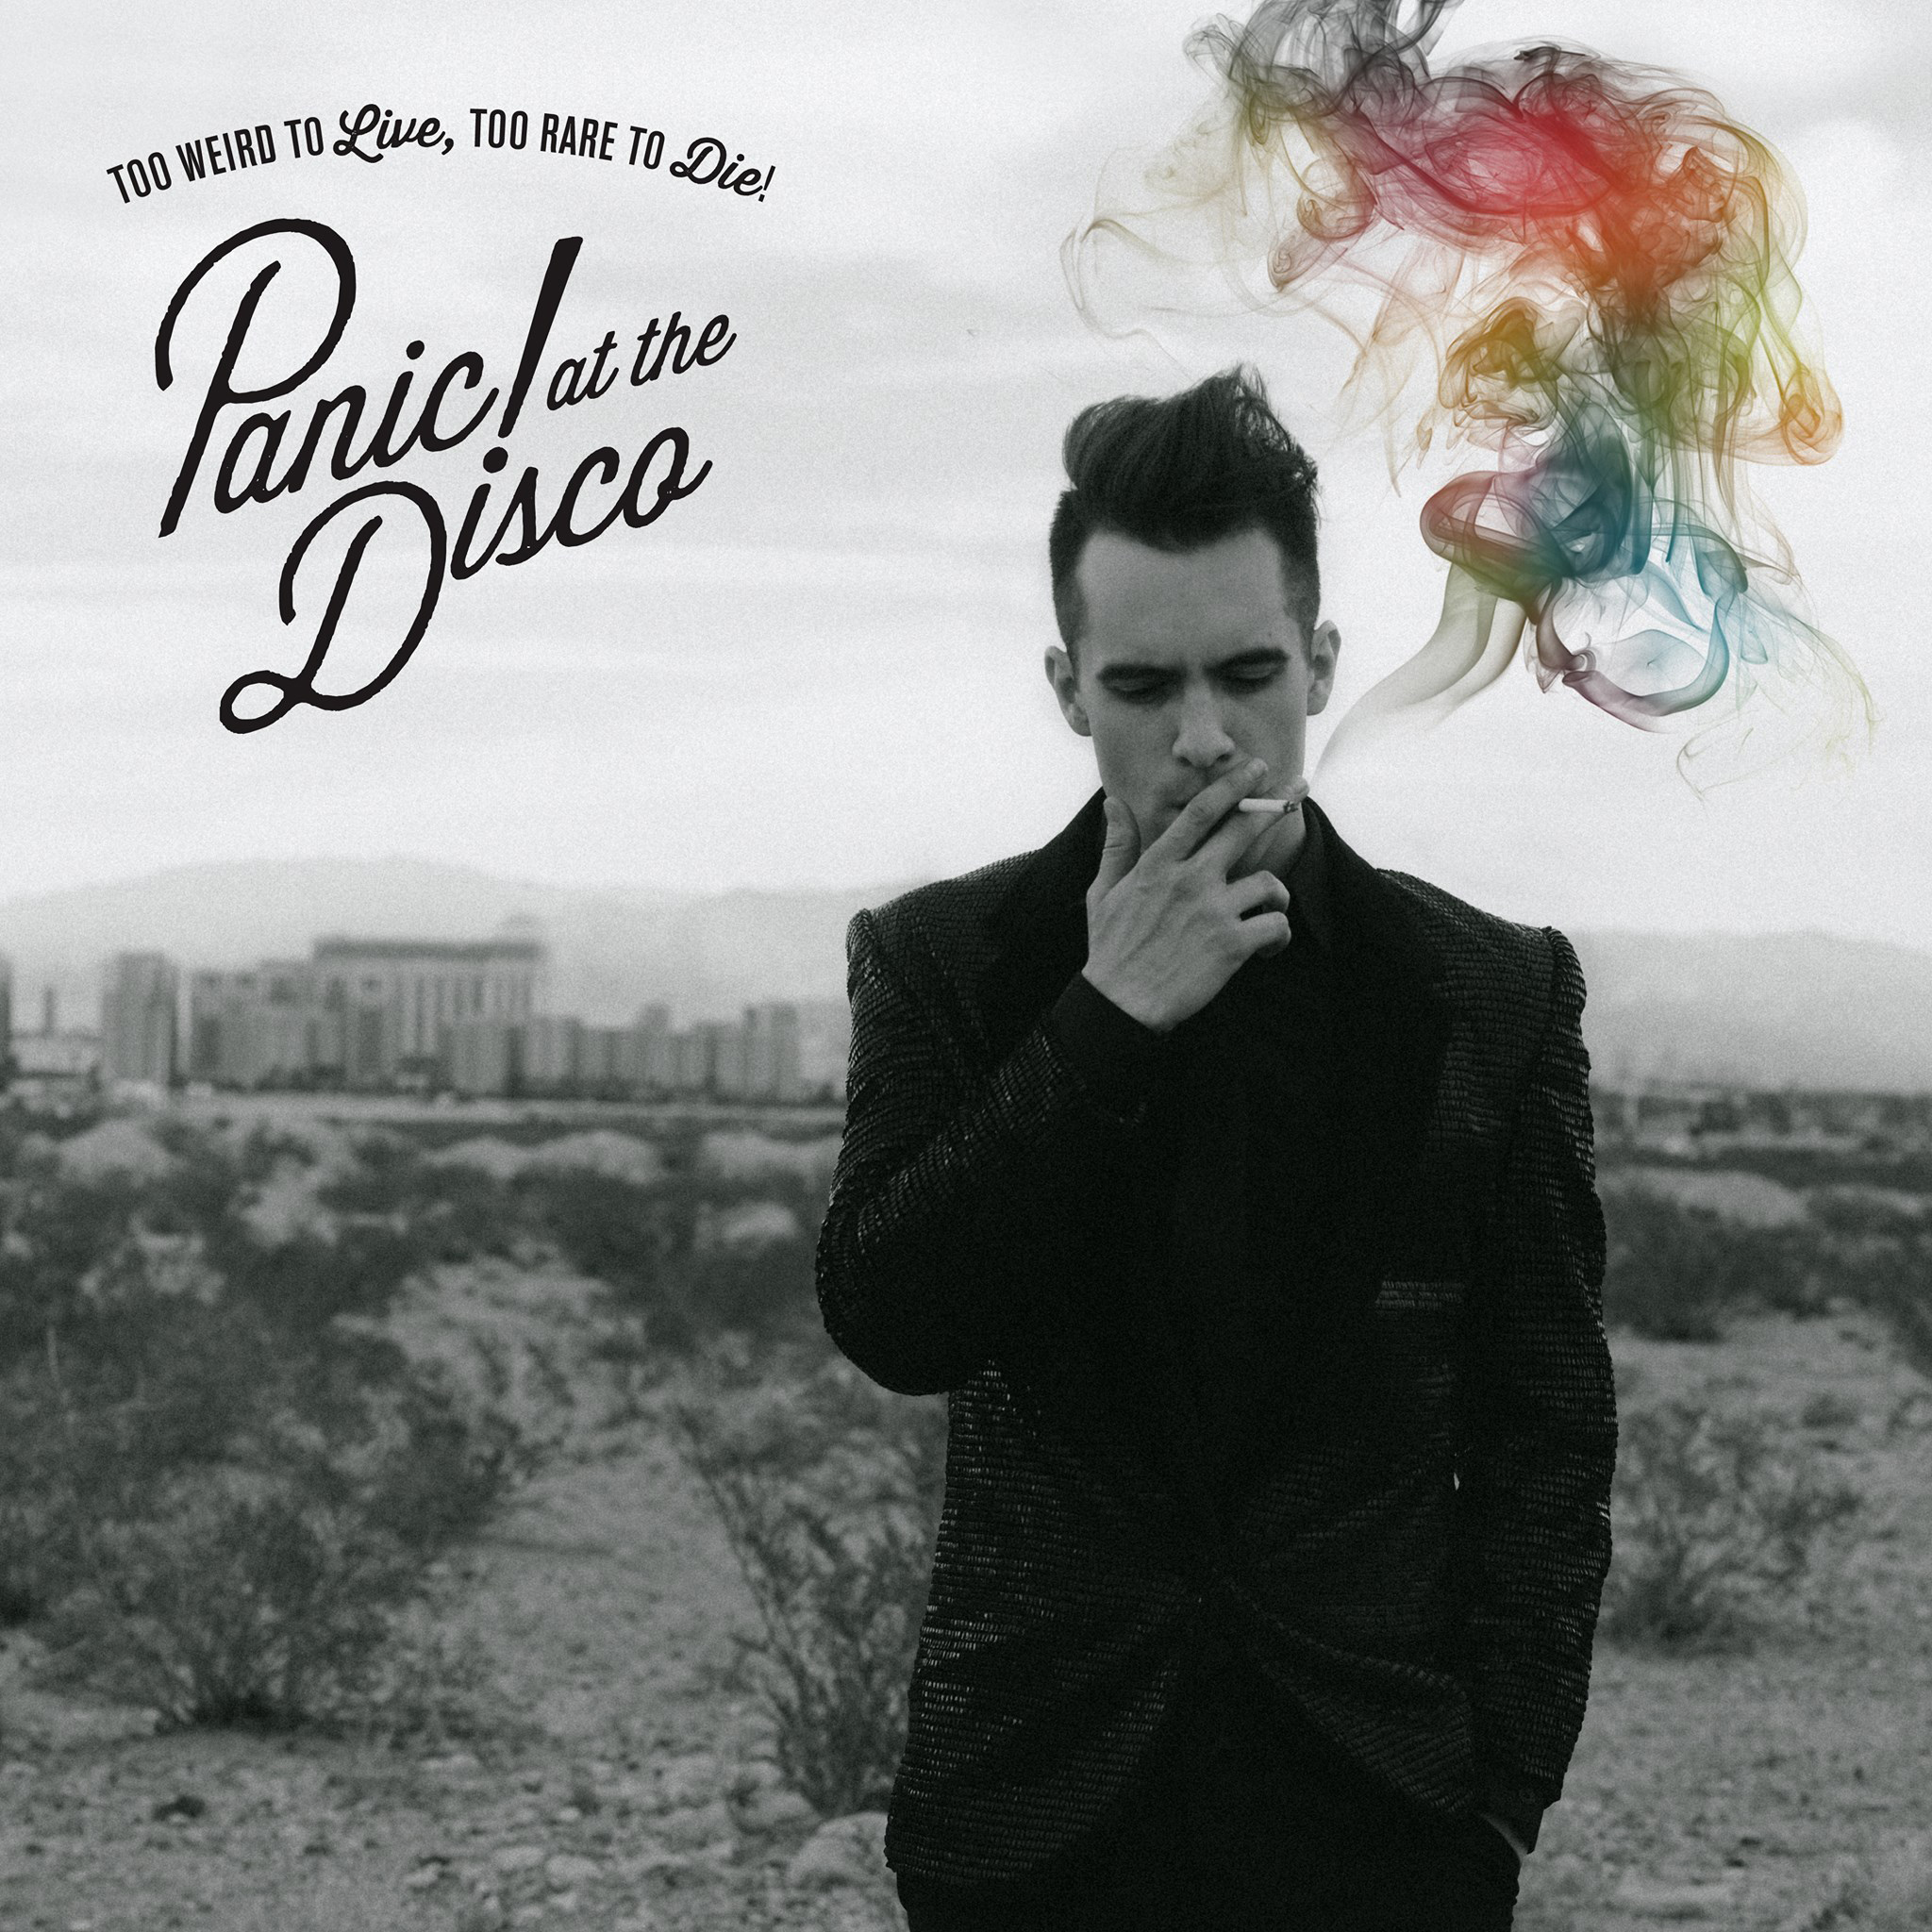 panic at the disco exclamation point